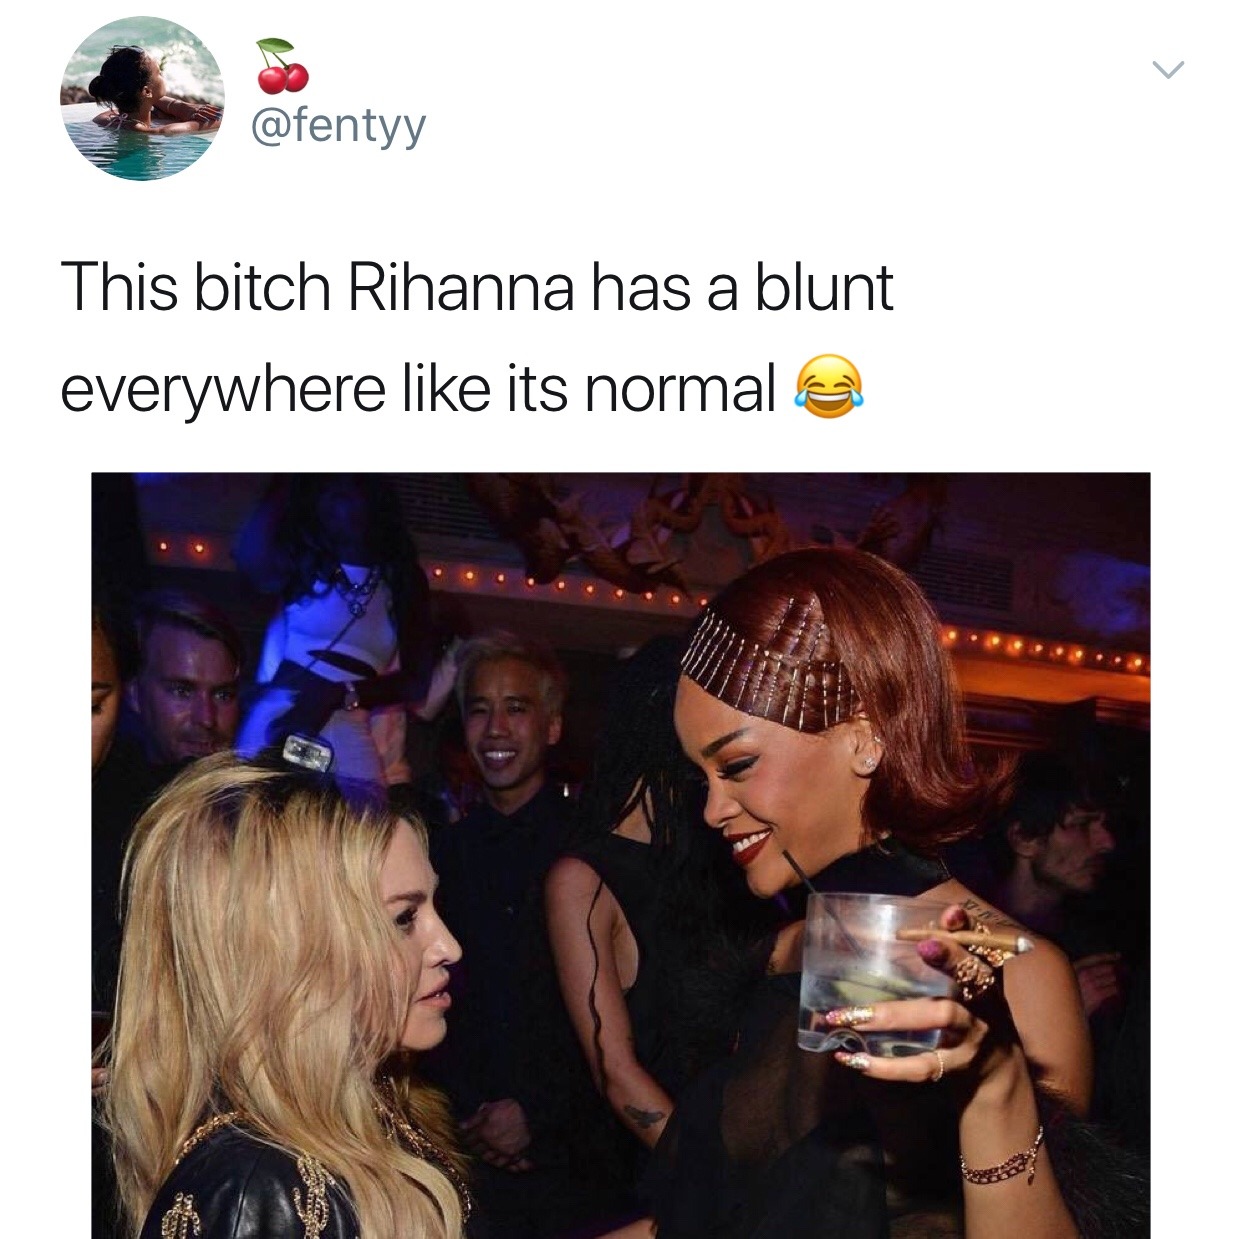 parks-and-rex: therealcheeto:  pocblog:   Rihanna:   You guys would go to war over